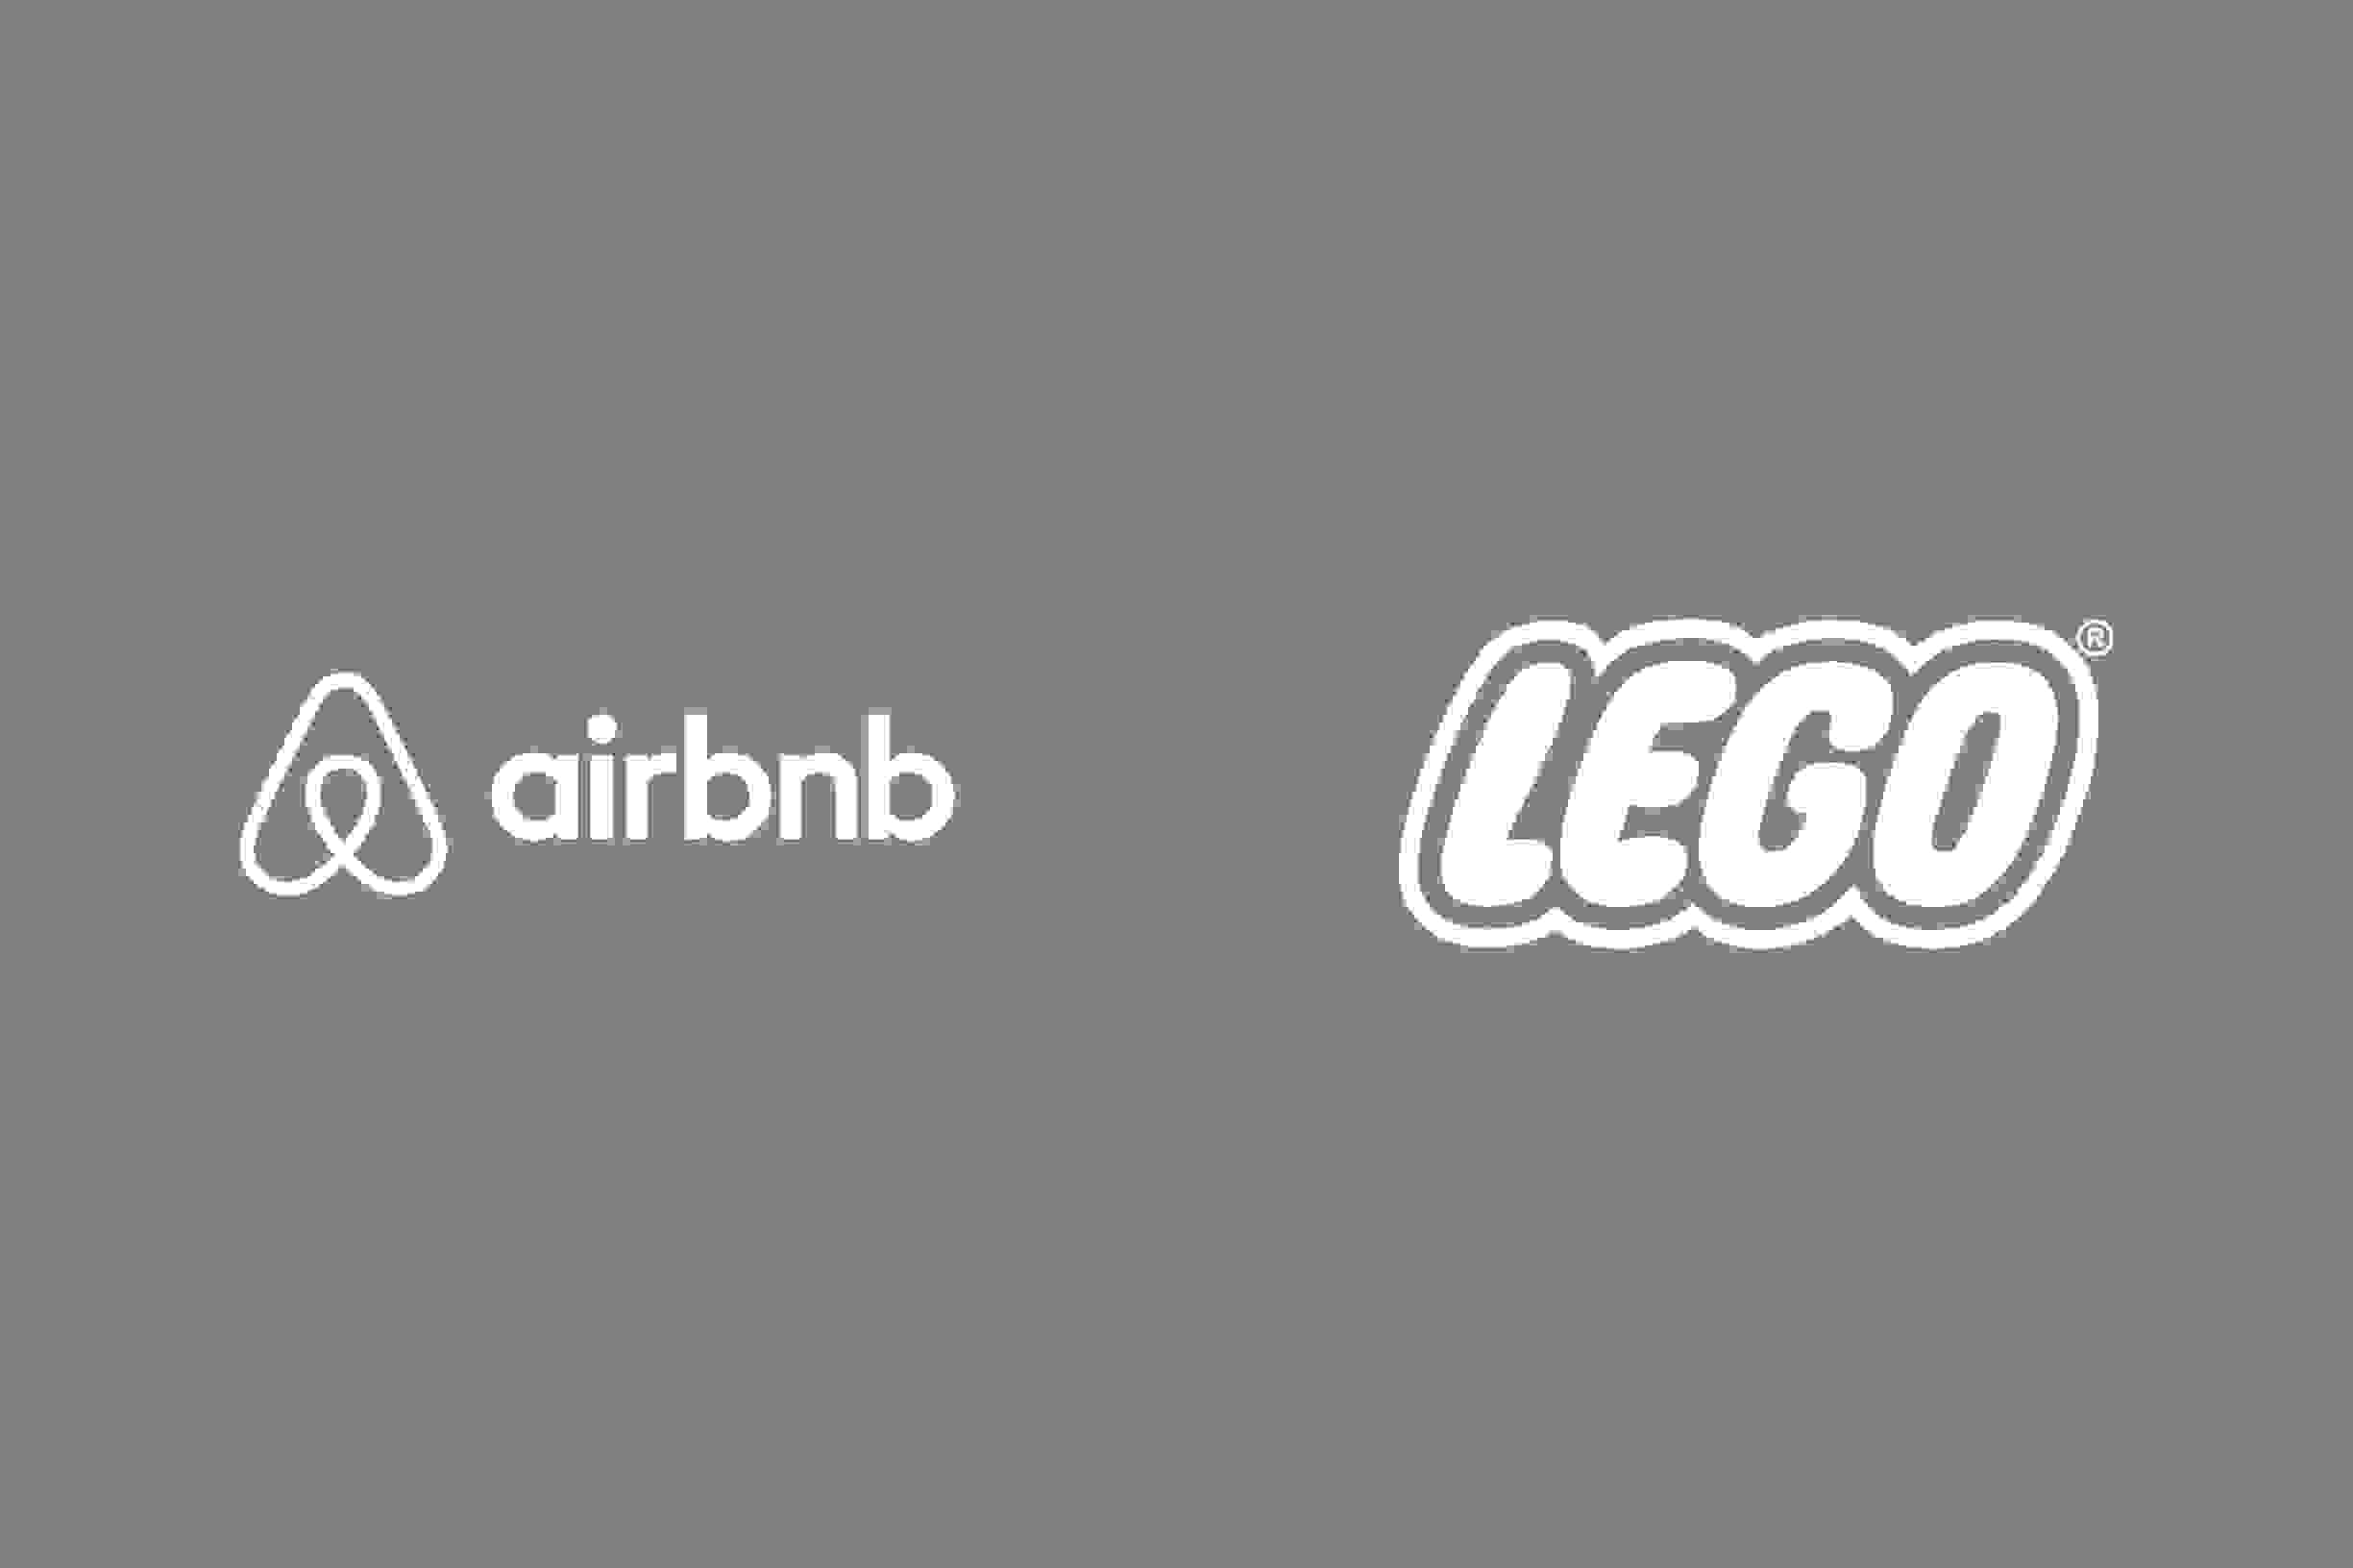 Airbnb and LEGO logo side by side